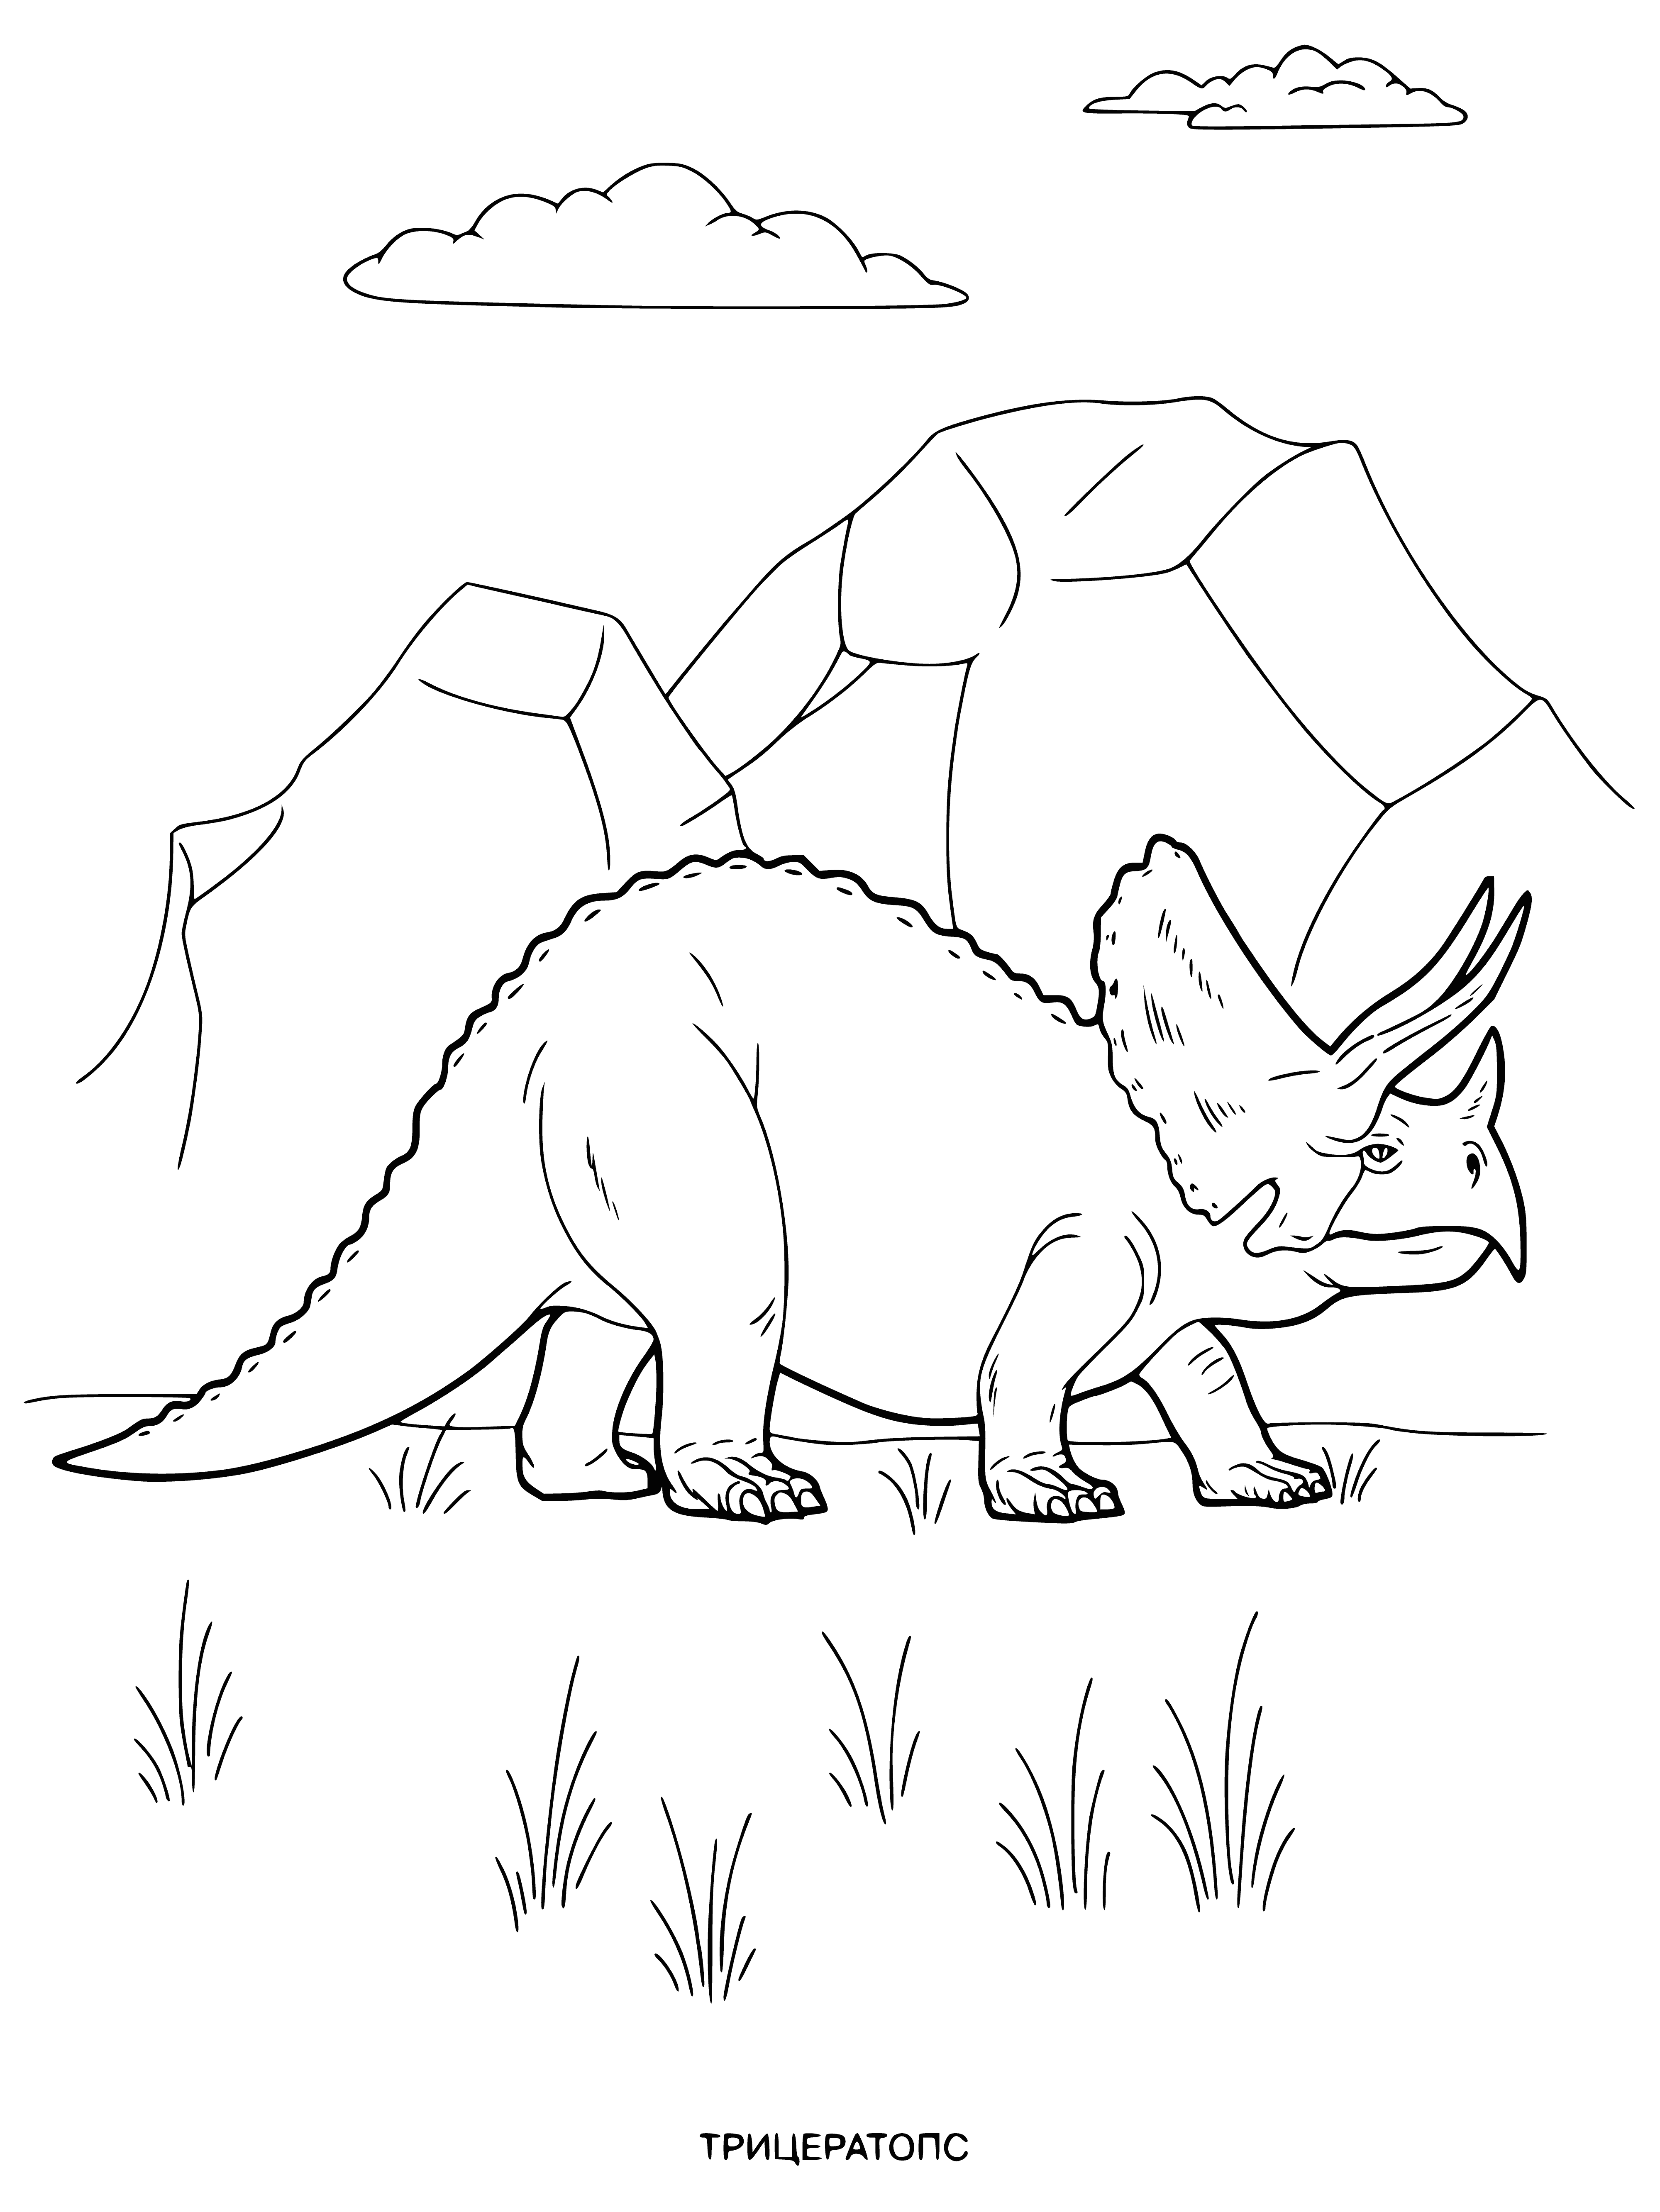 coloring page: Triceratops: large 4-legged creature w/ 3 horns & a long, thin tail. Stands in forest, scales & open mouth. #dinosaurs